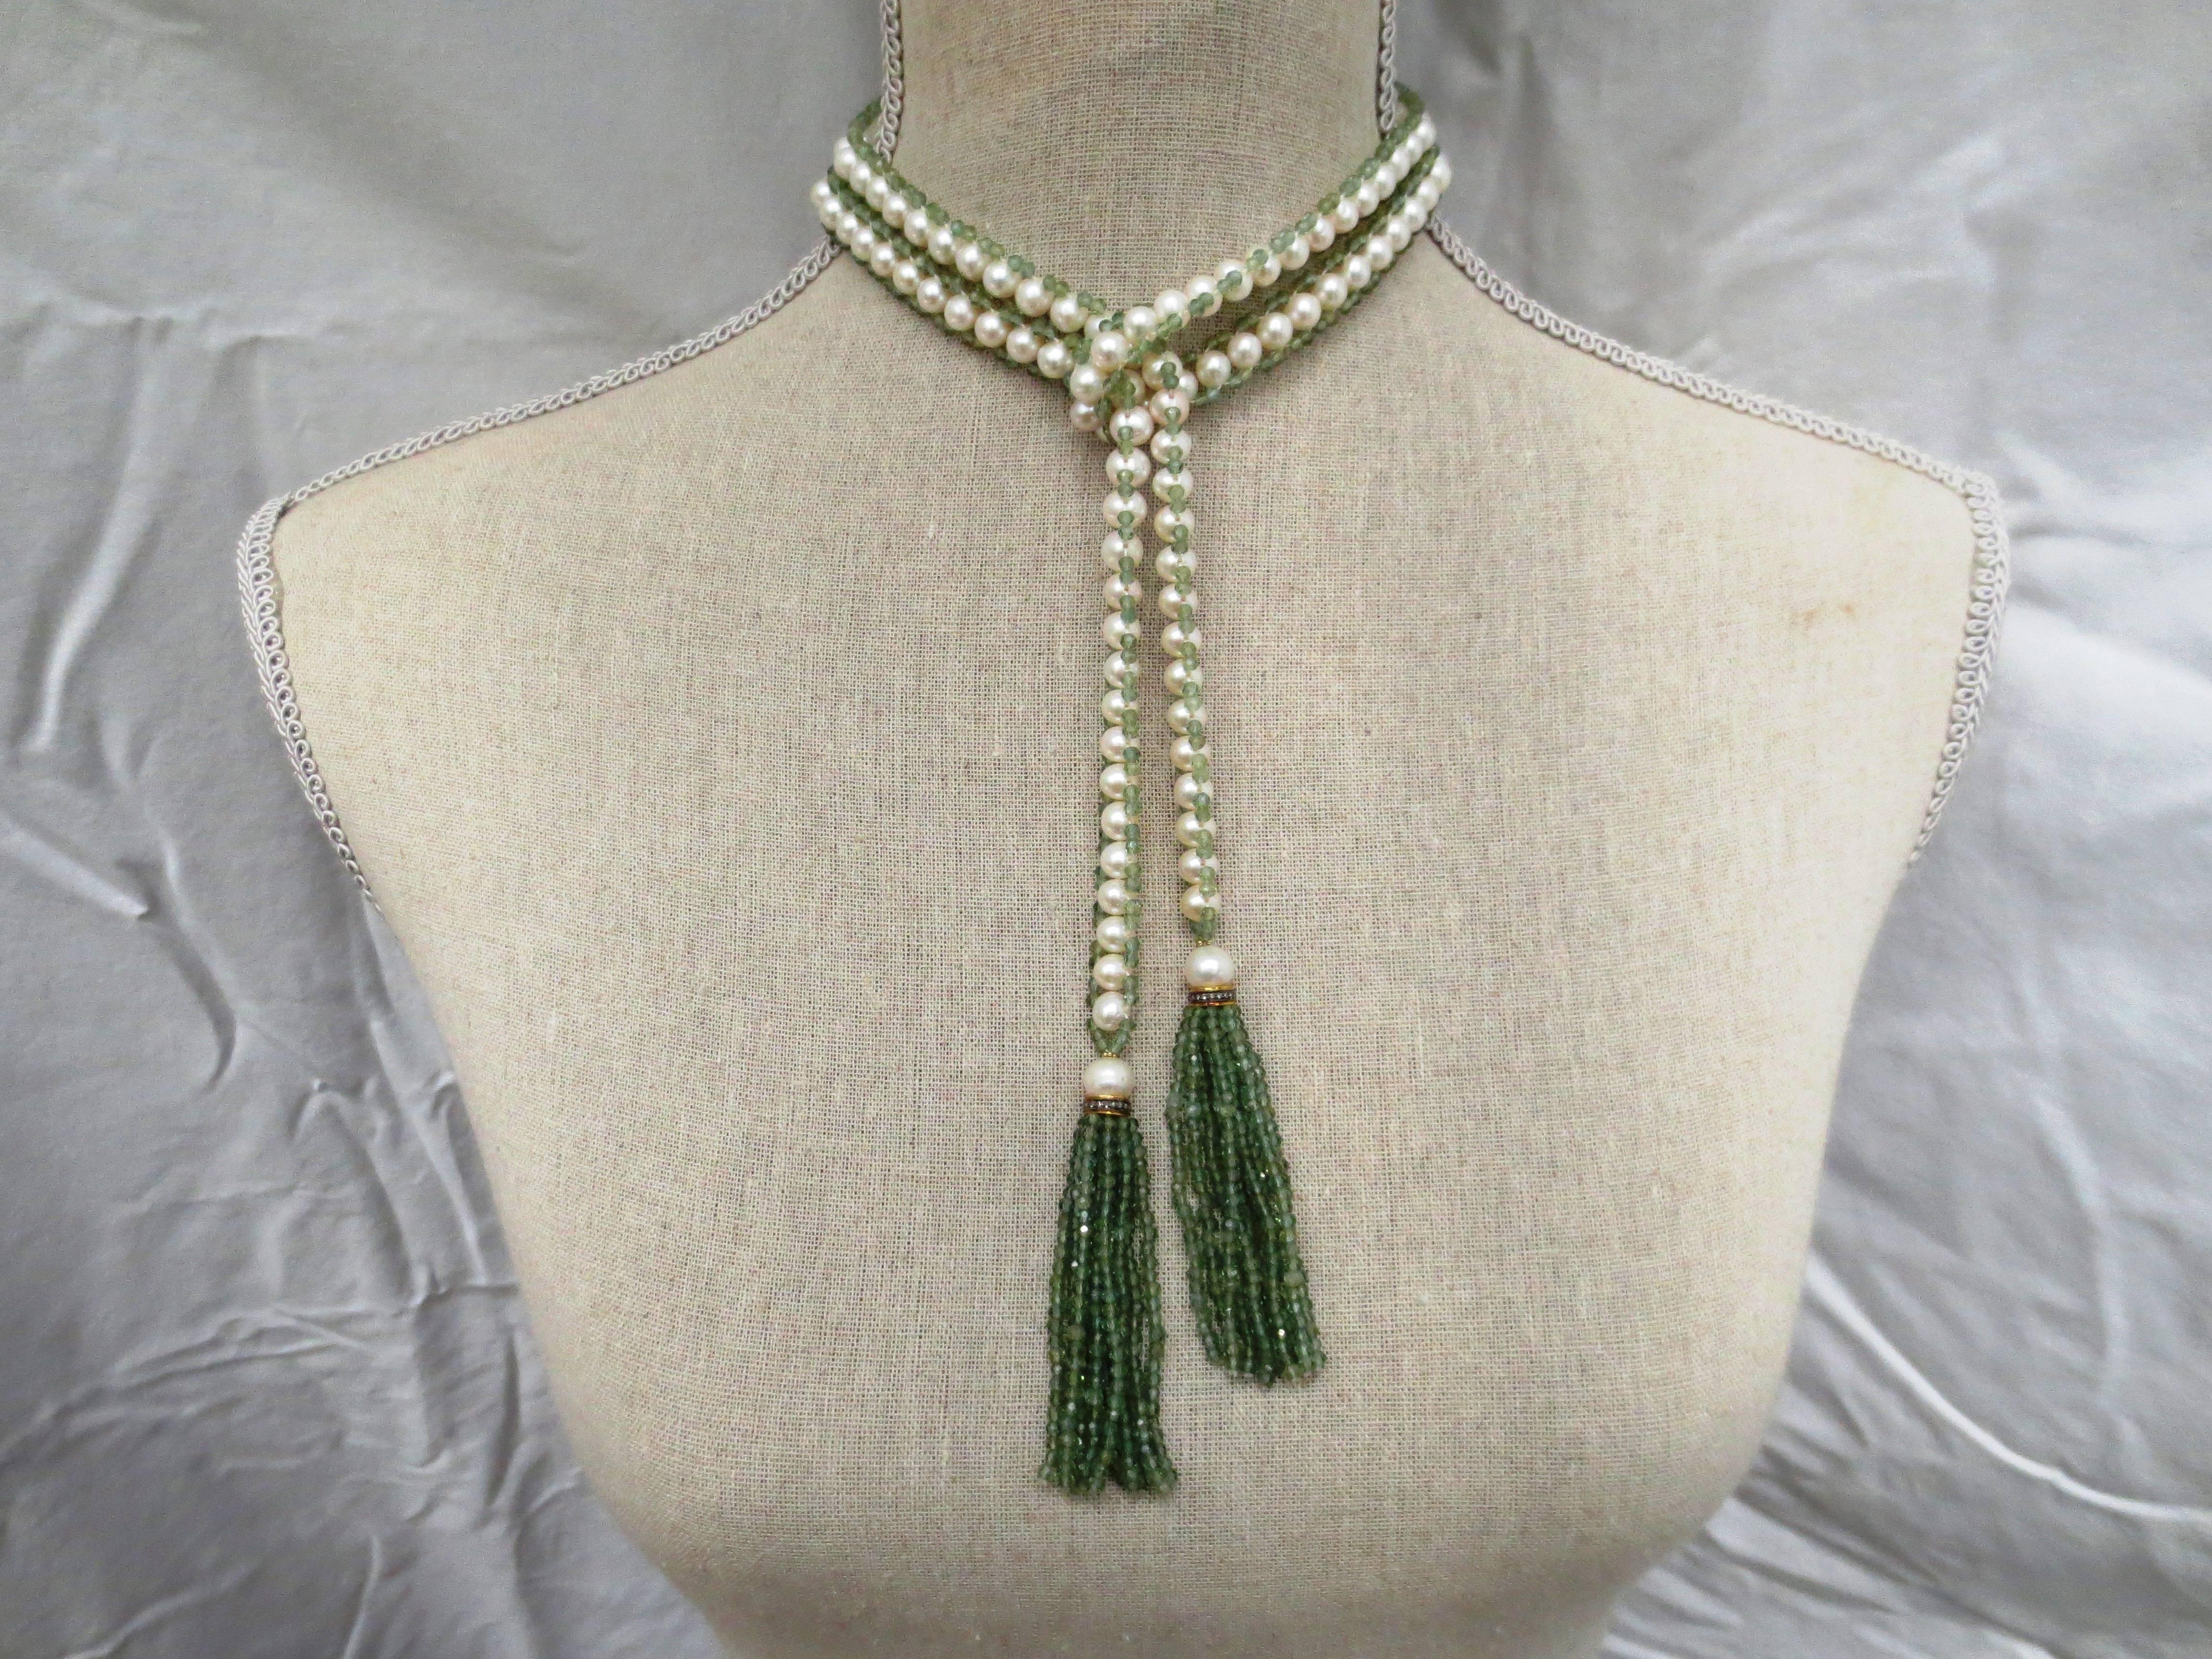 Artist Versatile Pearl and Apatite Bead Sautoir Tassel Necklace with Wedgwood Cameo